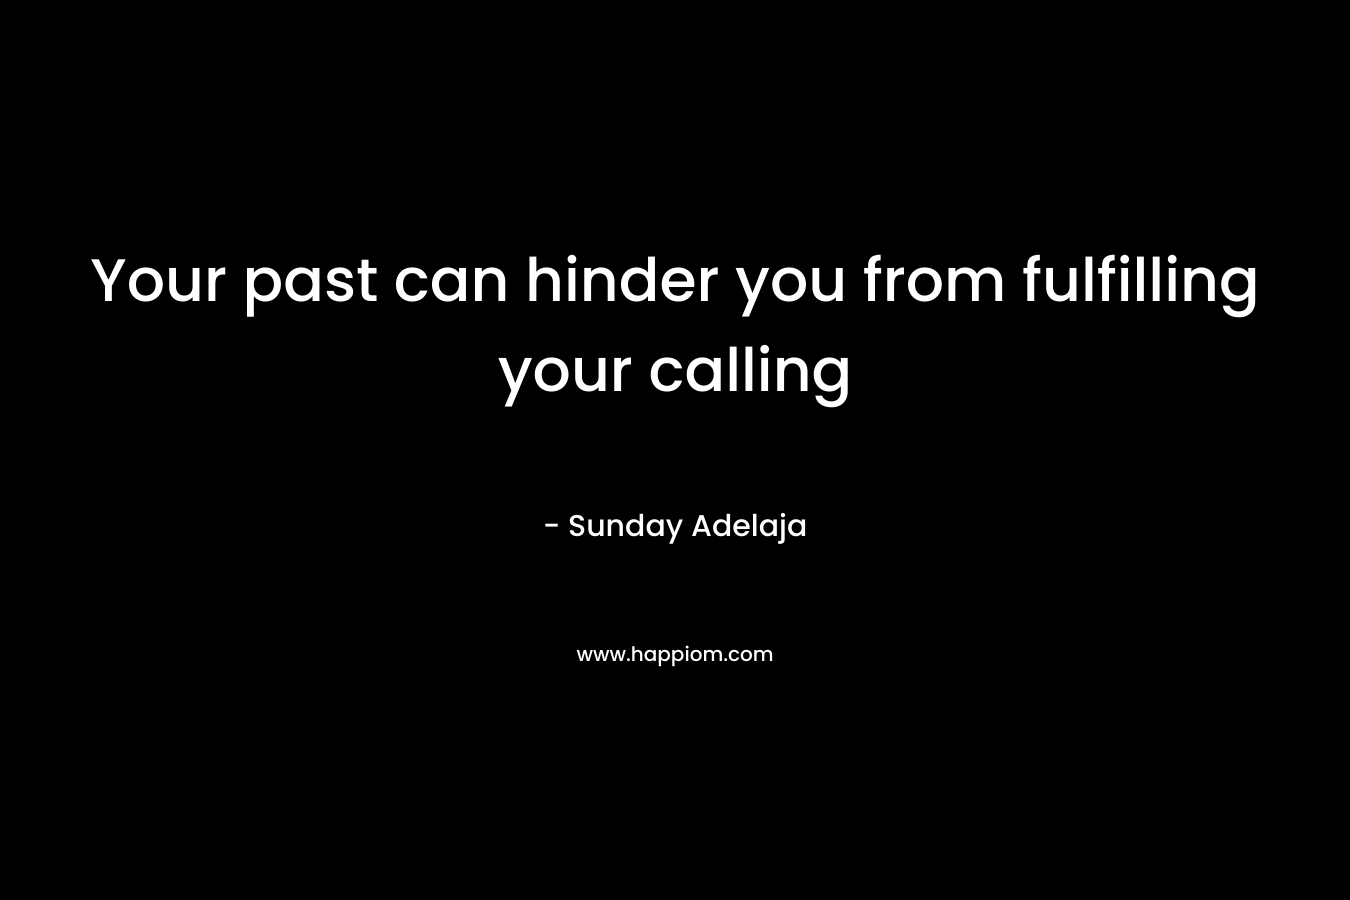 Your past can hinder you from fulfilling your calling